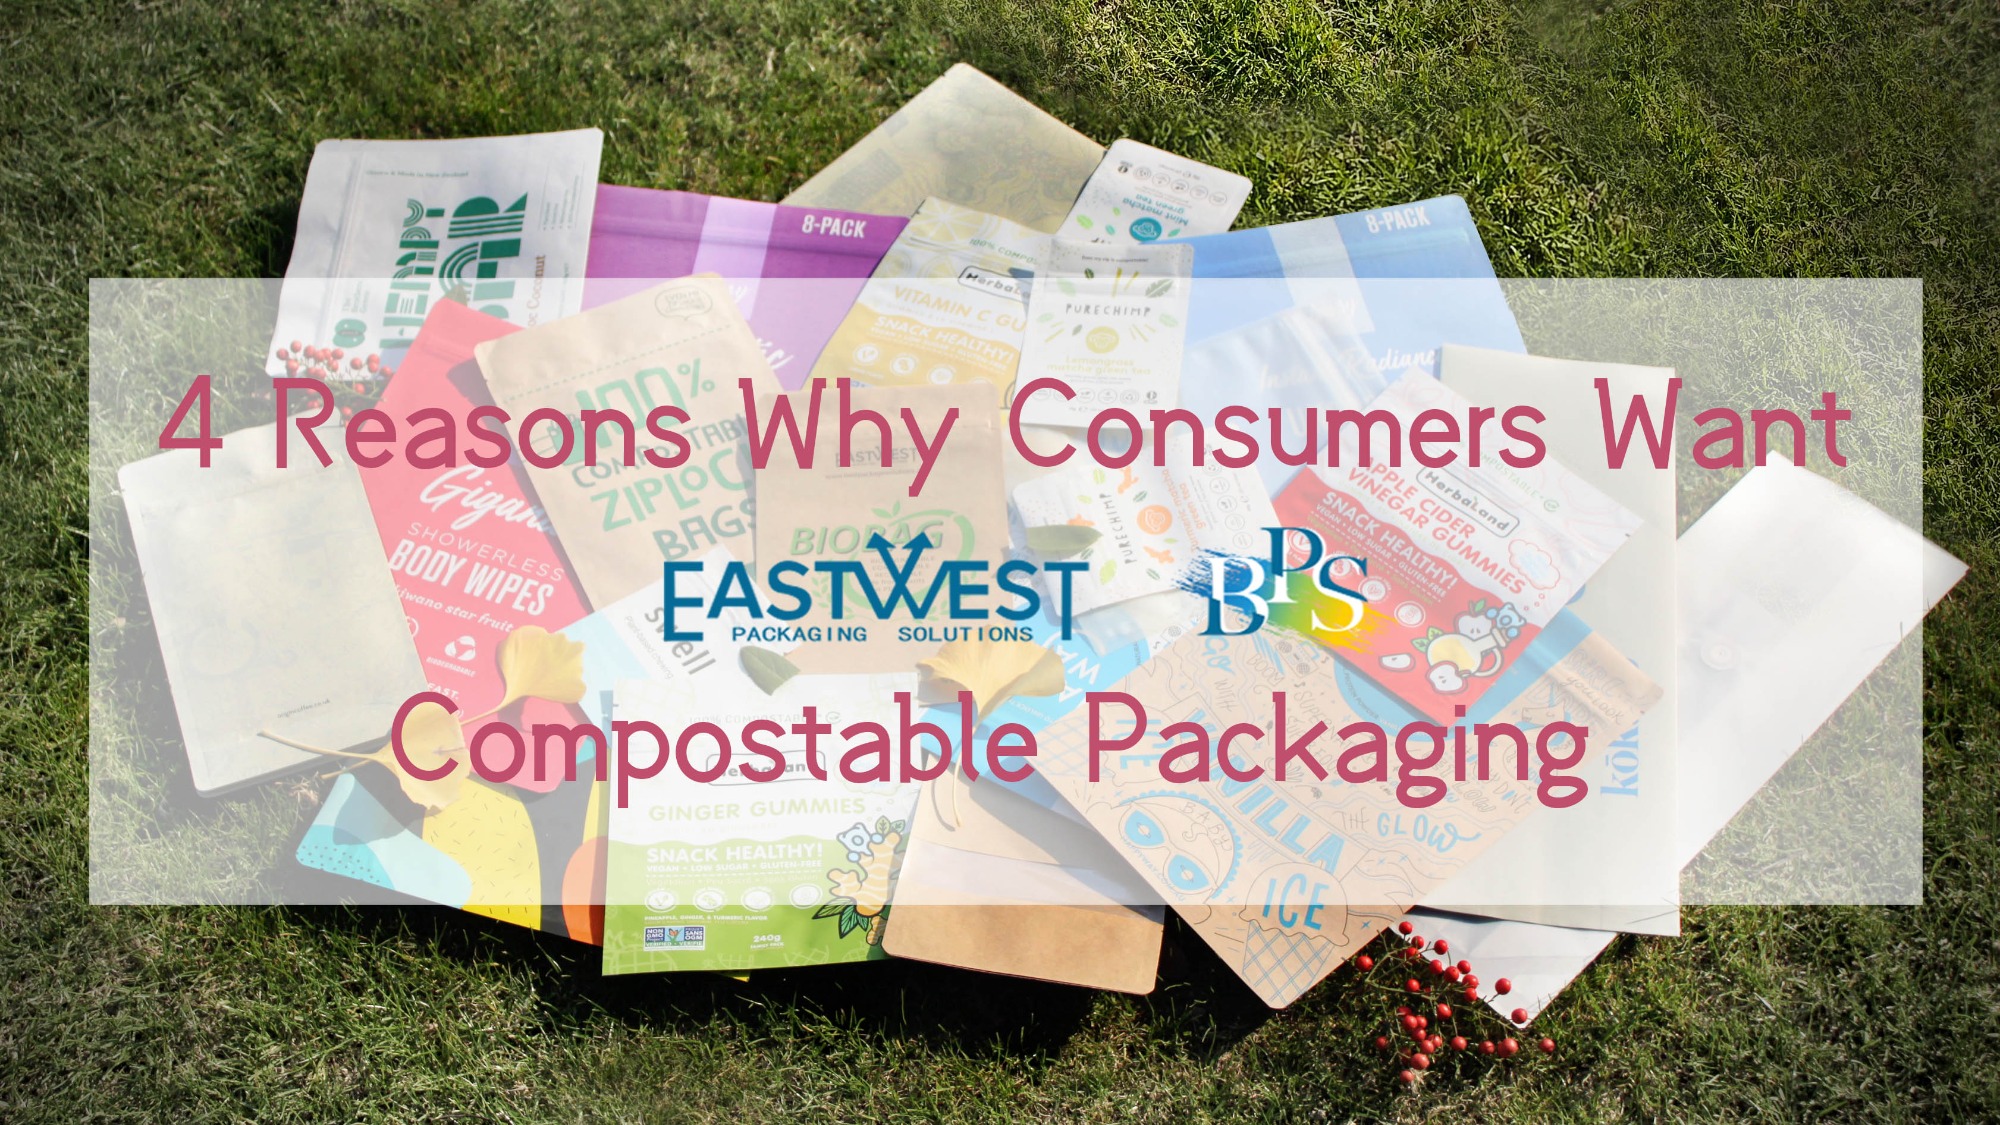 4 Reasons Why Consumers Want Compostable Packaging